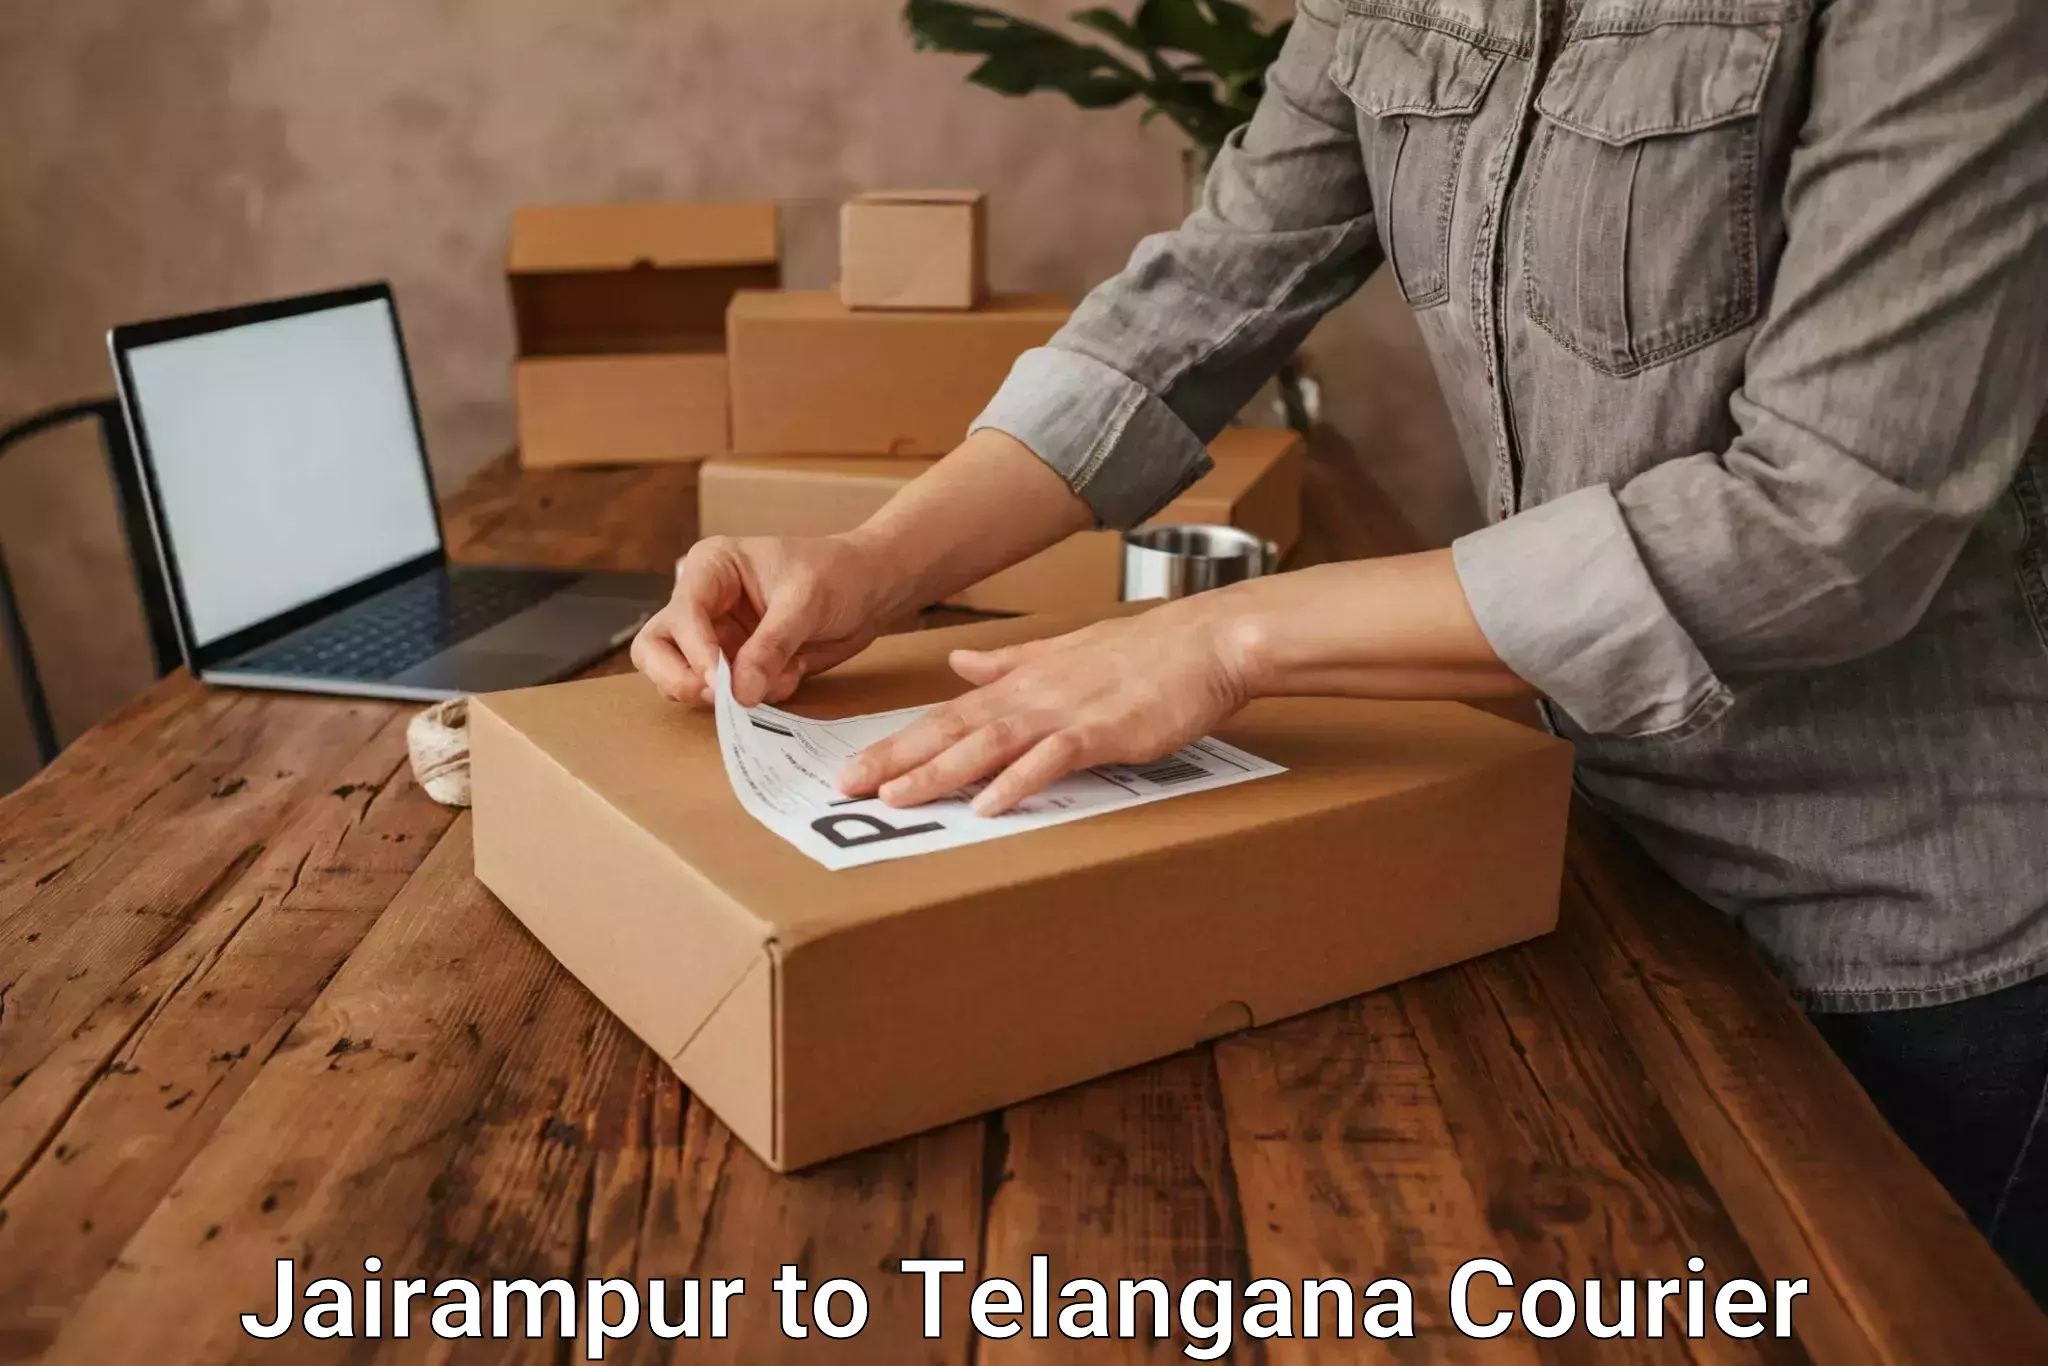 Courier service efficiency Jairampur to Siddipet